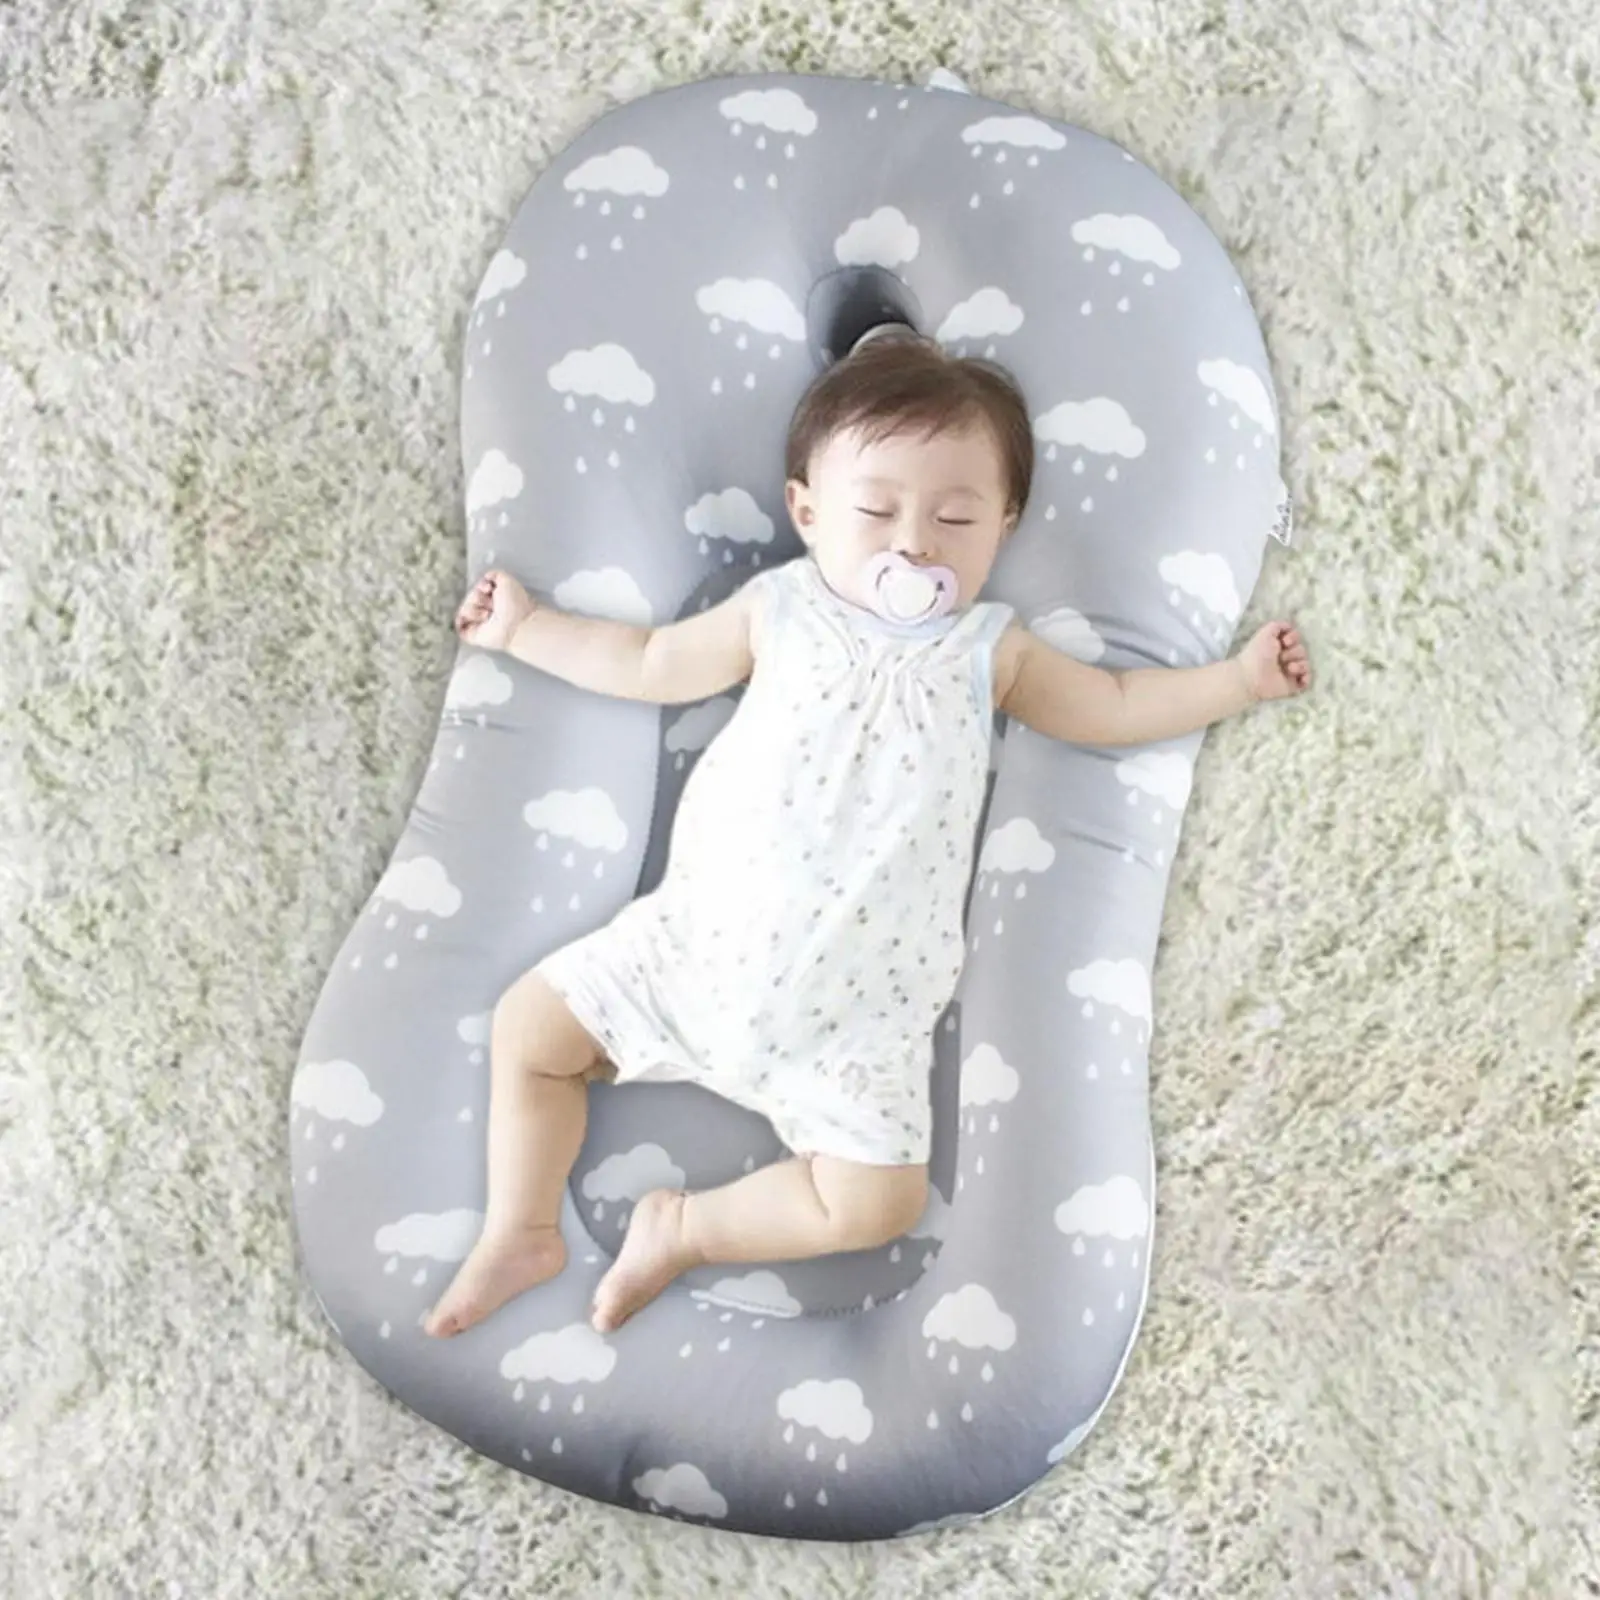 Baby Bath Mat Floating Quick Drying Hook Design Comfortable Baby Bath Cushion Pad Bath Supporter for Infant Newborn 0-12 Month